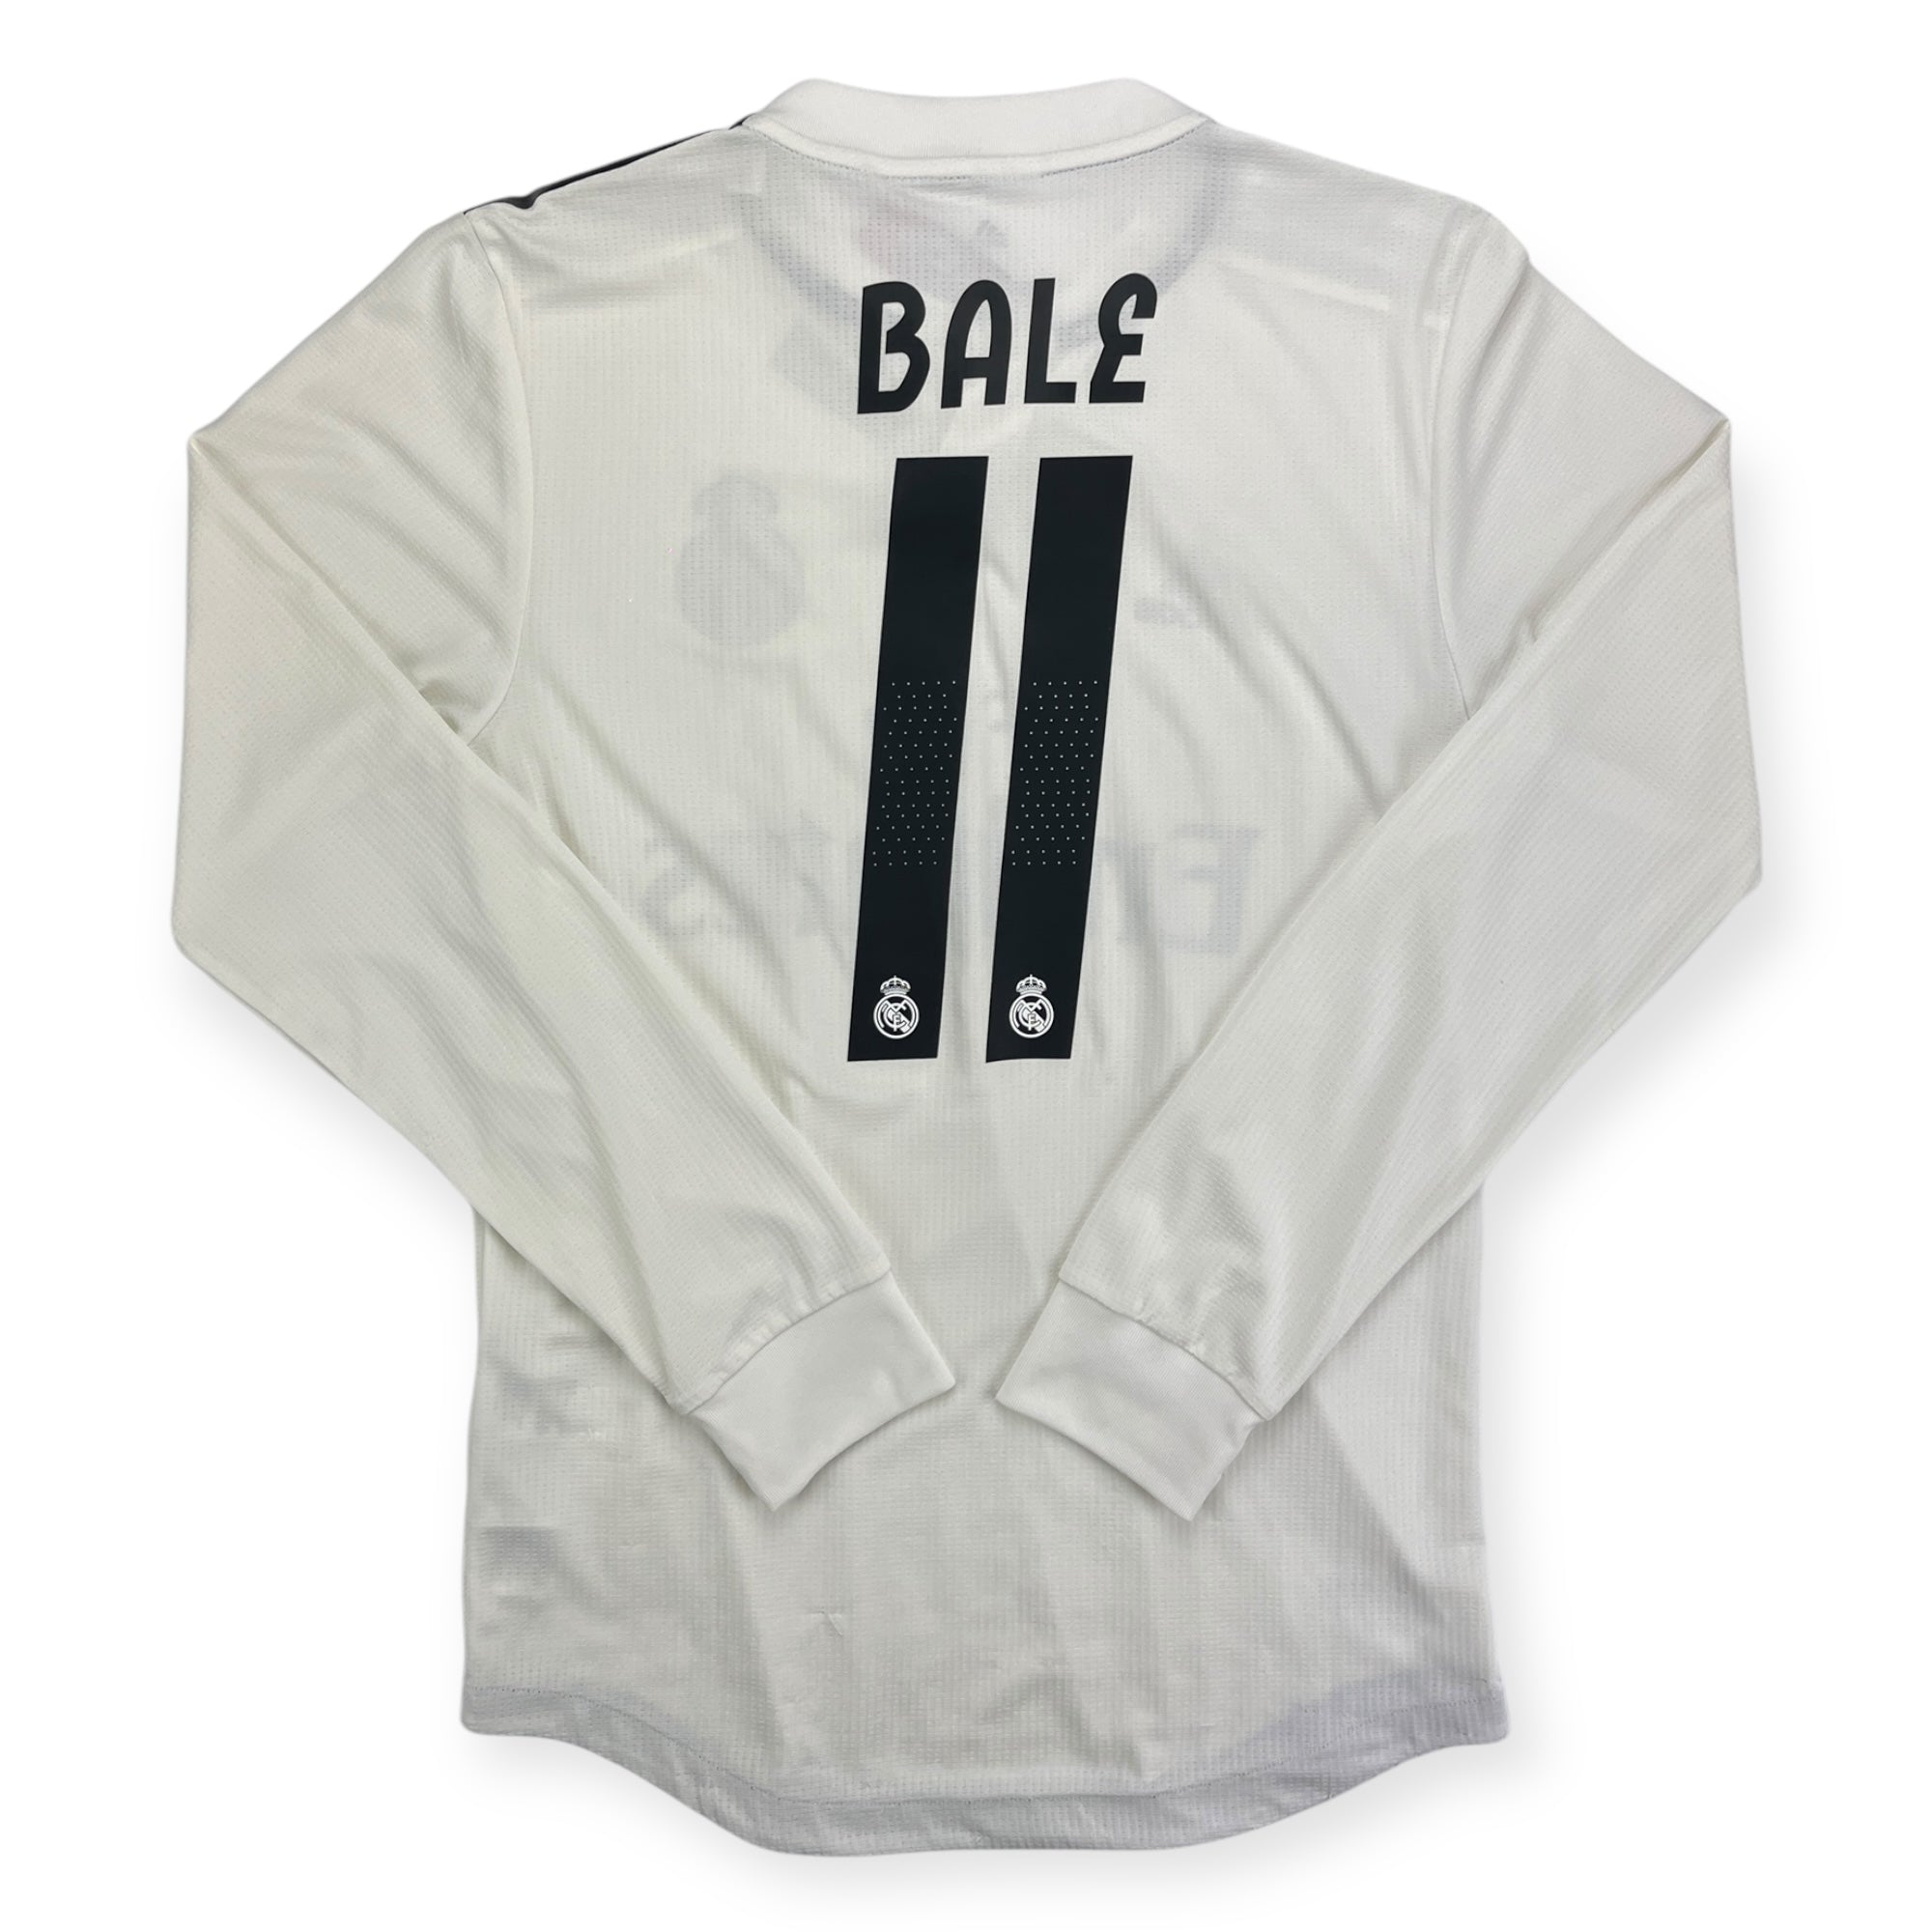 Real Madrid 2018 Home Shirt, Player Issue, Bale 11